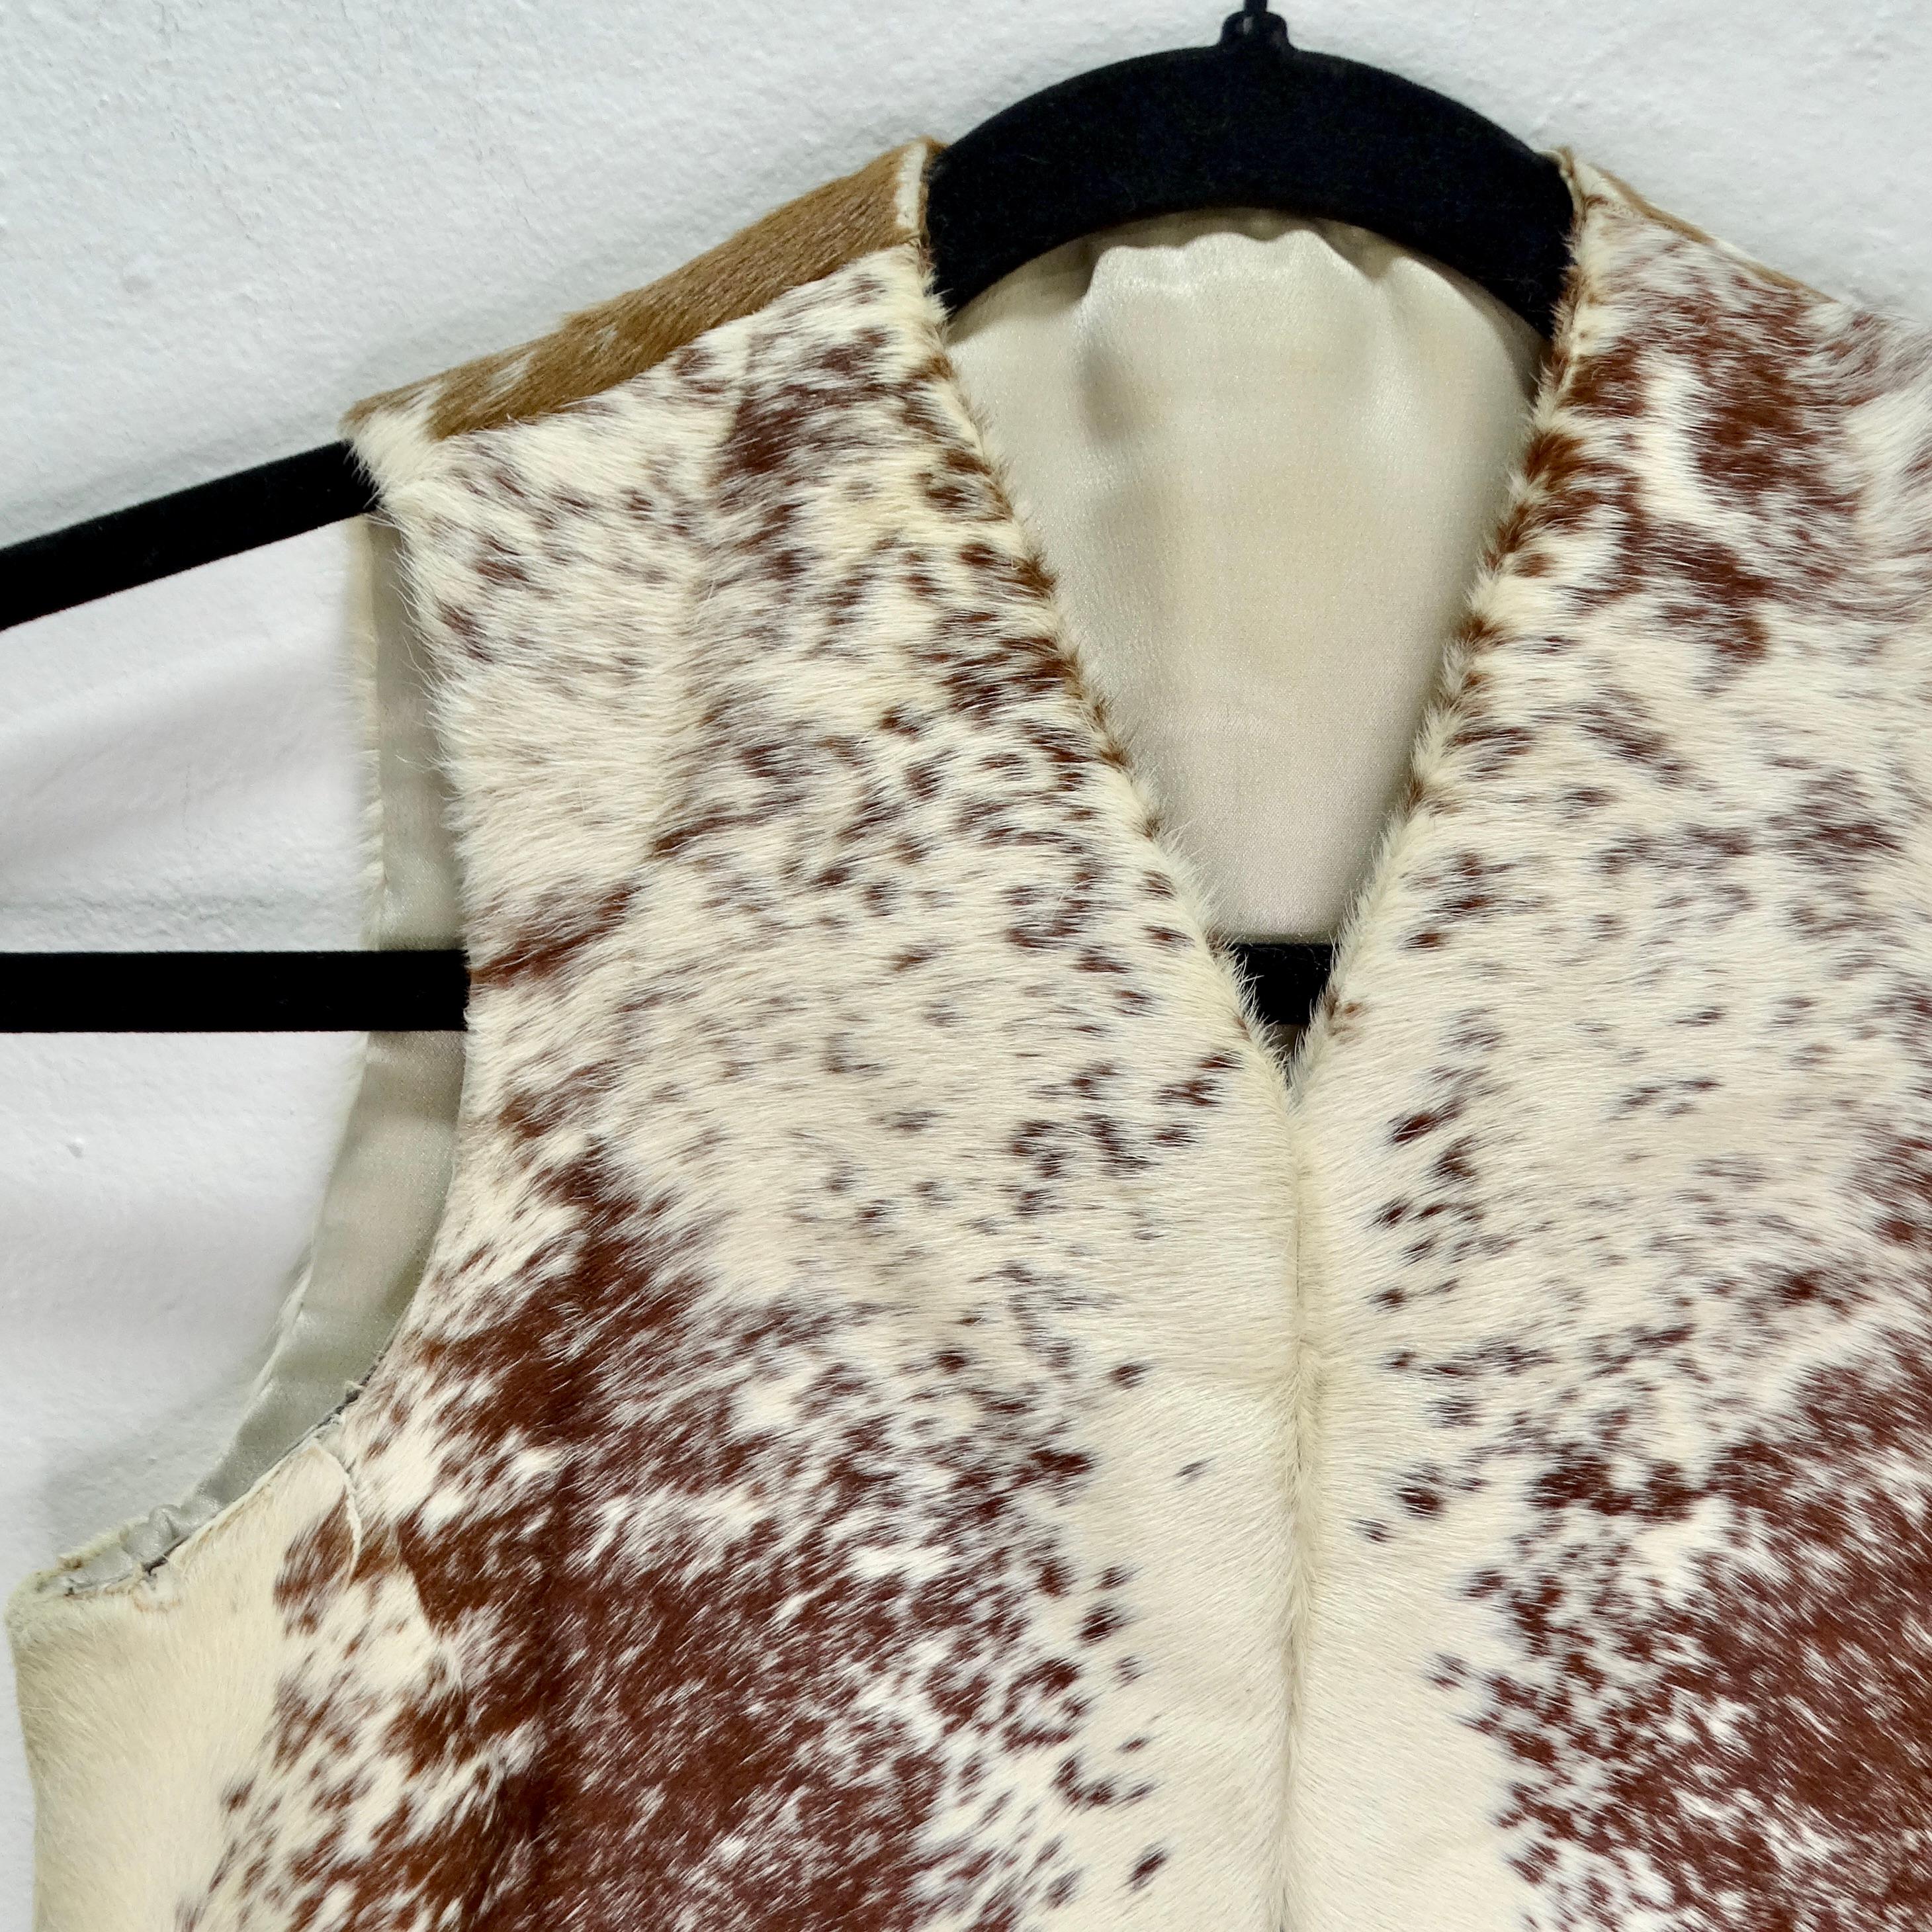 Elevate your Western-inspired look with this Vintage Western Cowhide Vest. Crafted in the 1980s, this vest features a striking combination of white and brown cowhide fur that exudes rustic charm and timeless appeal.

Lined with silk for added